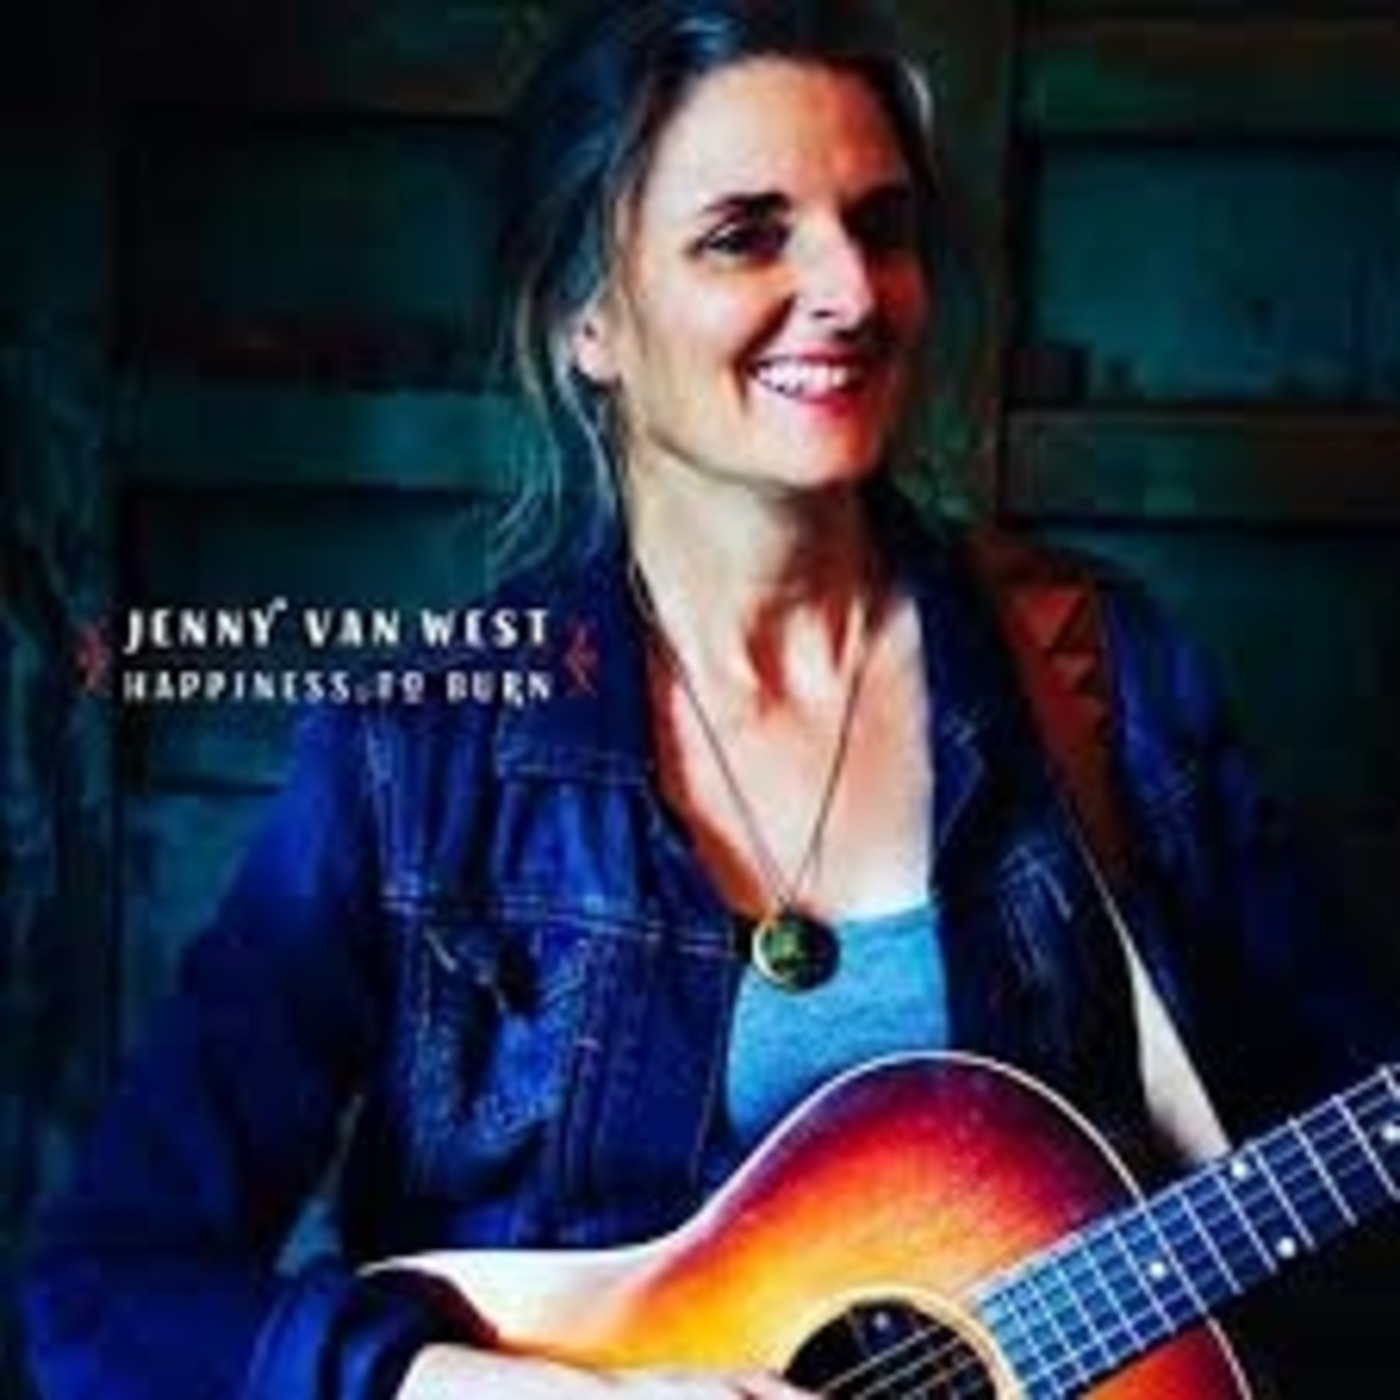 Where I Stand by Jenny Van West